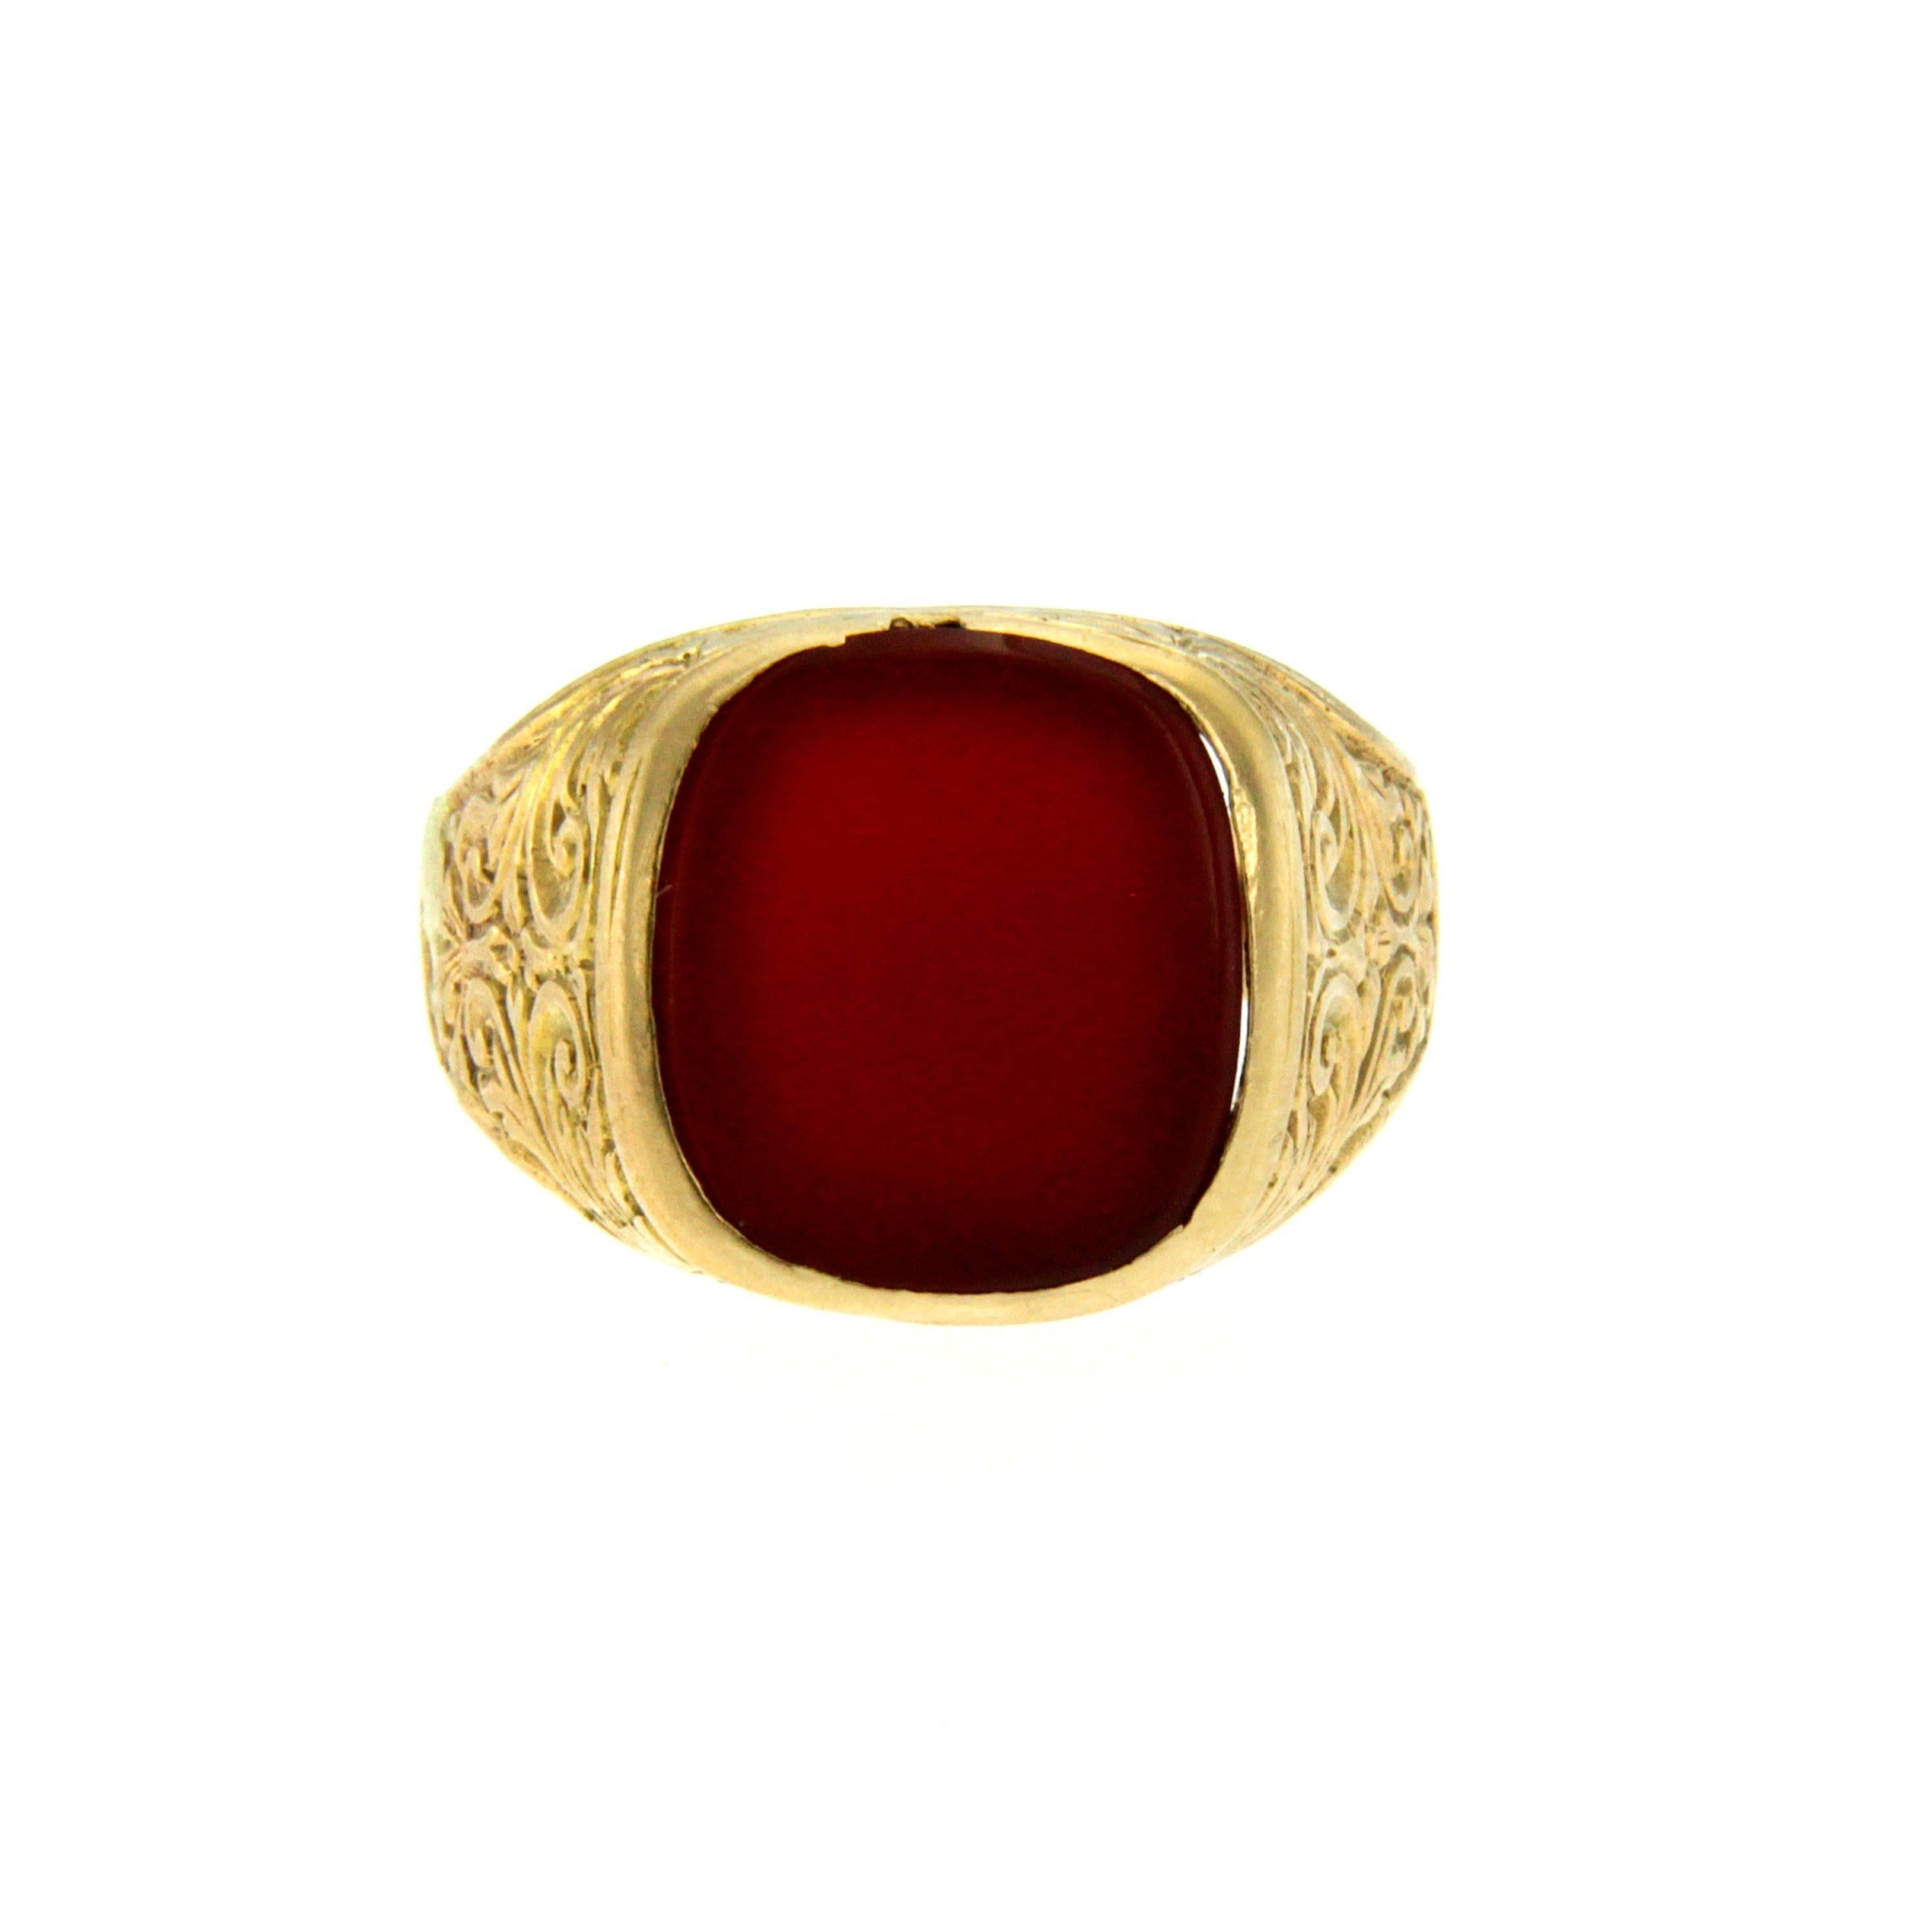 Antique and unique unisex ring mounted in 18k yellow Gold, featururing engraved shoulders and a large central Carnelian.
Circa 1800.

CONDITION: BPre Owned -  Excellent
METAL: 18k Gold 
GEM STONE: Carnelian
DESIGN ERA: early 1800s
WEIGHT: 9.35